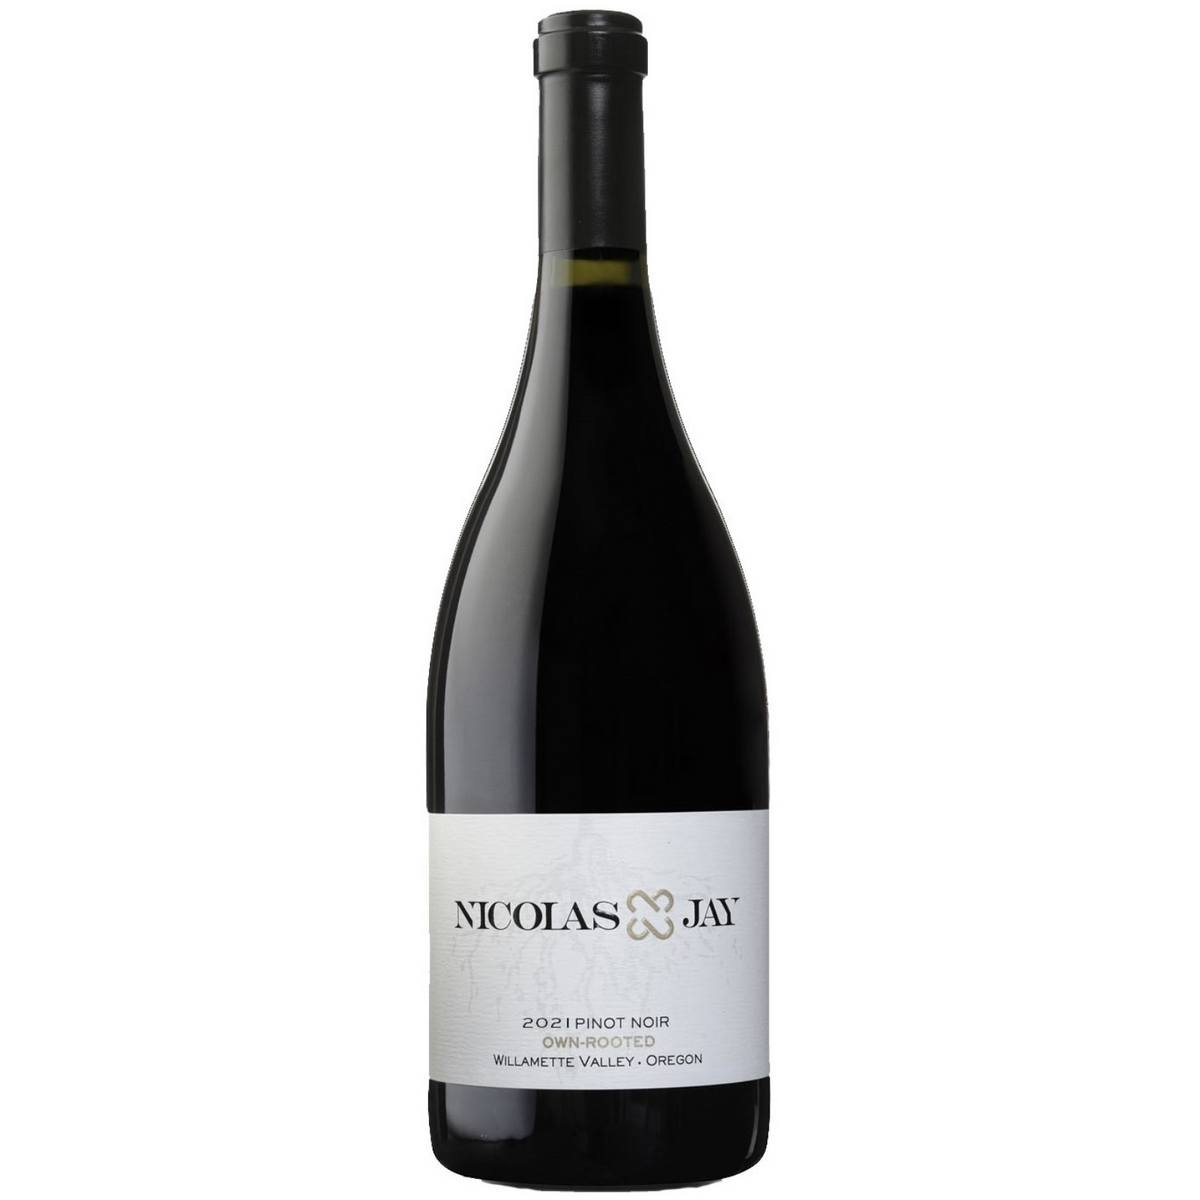 Nicolas Jay 'Own-Rooted' Pinot Noir, Willamette Valley, USA 2021